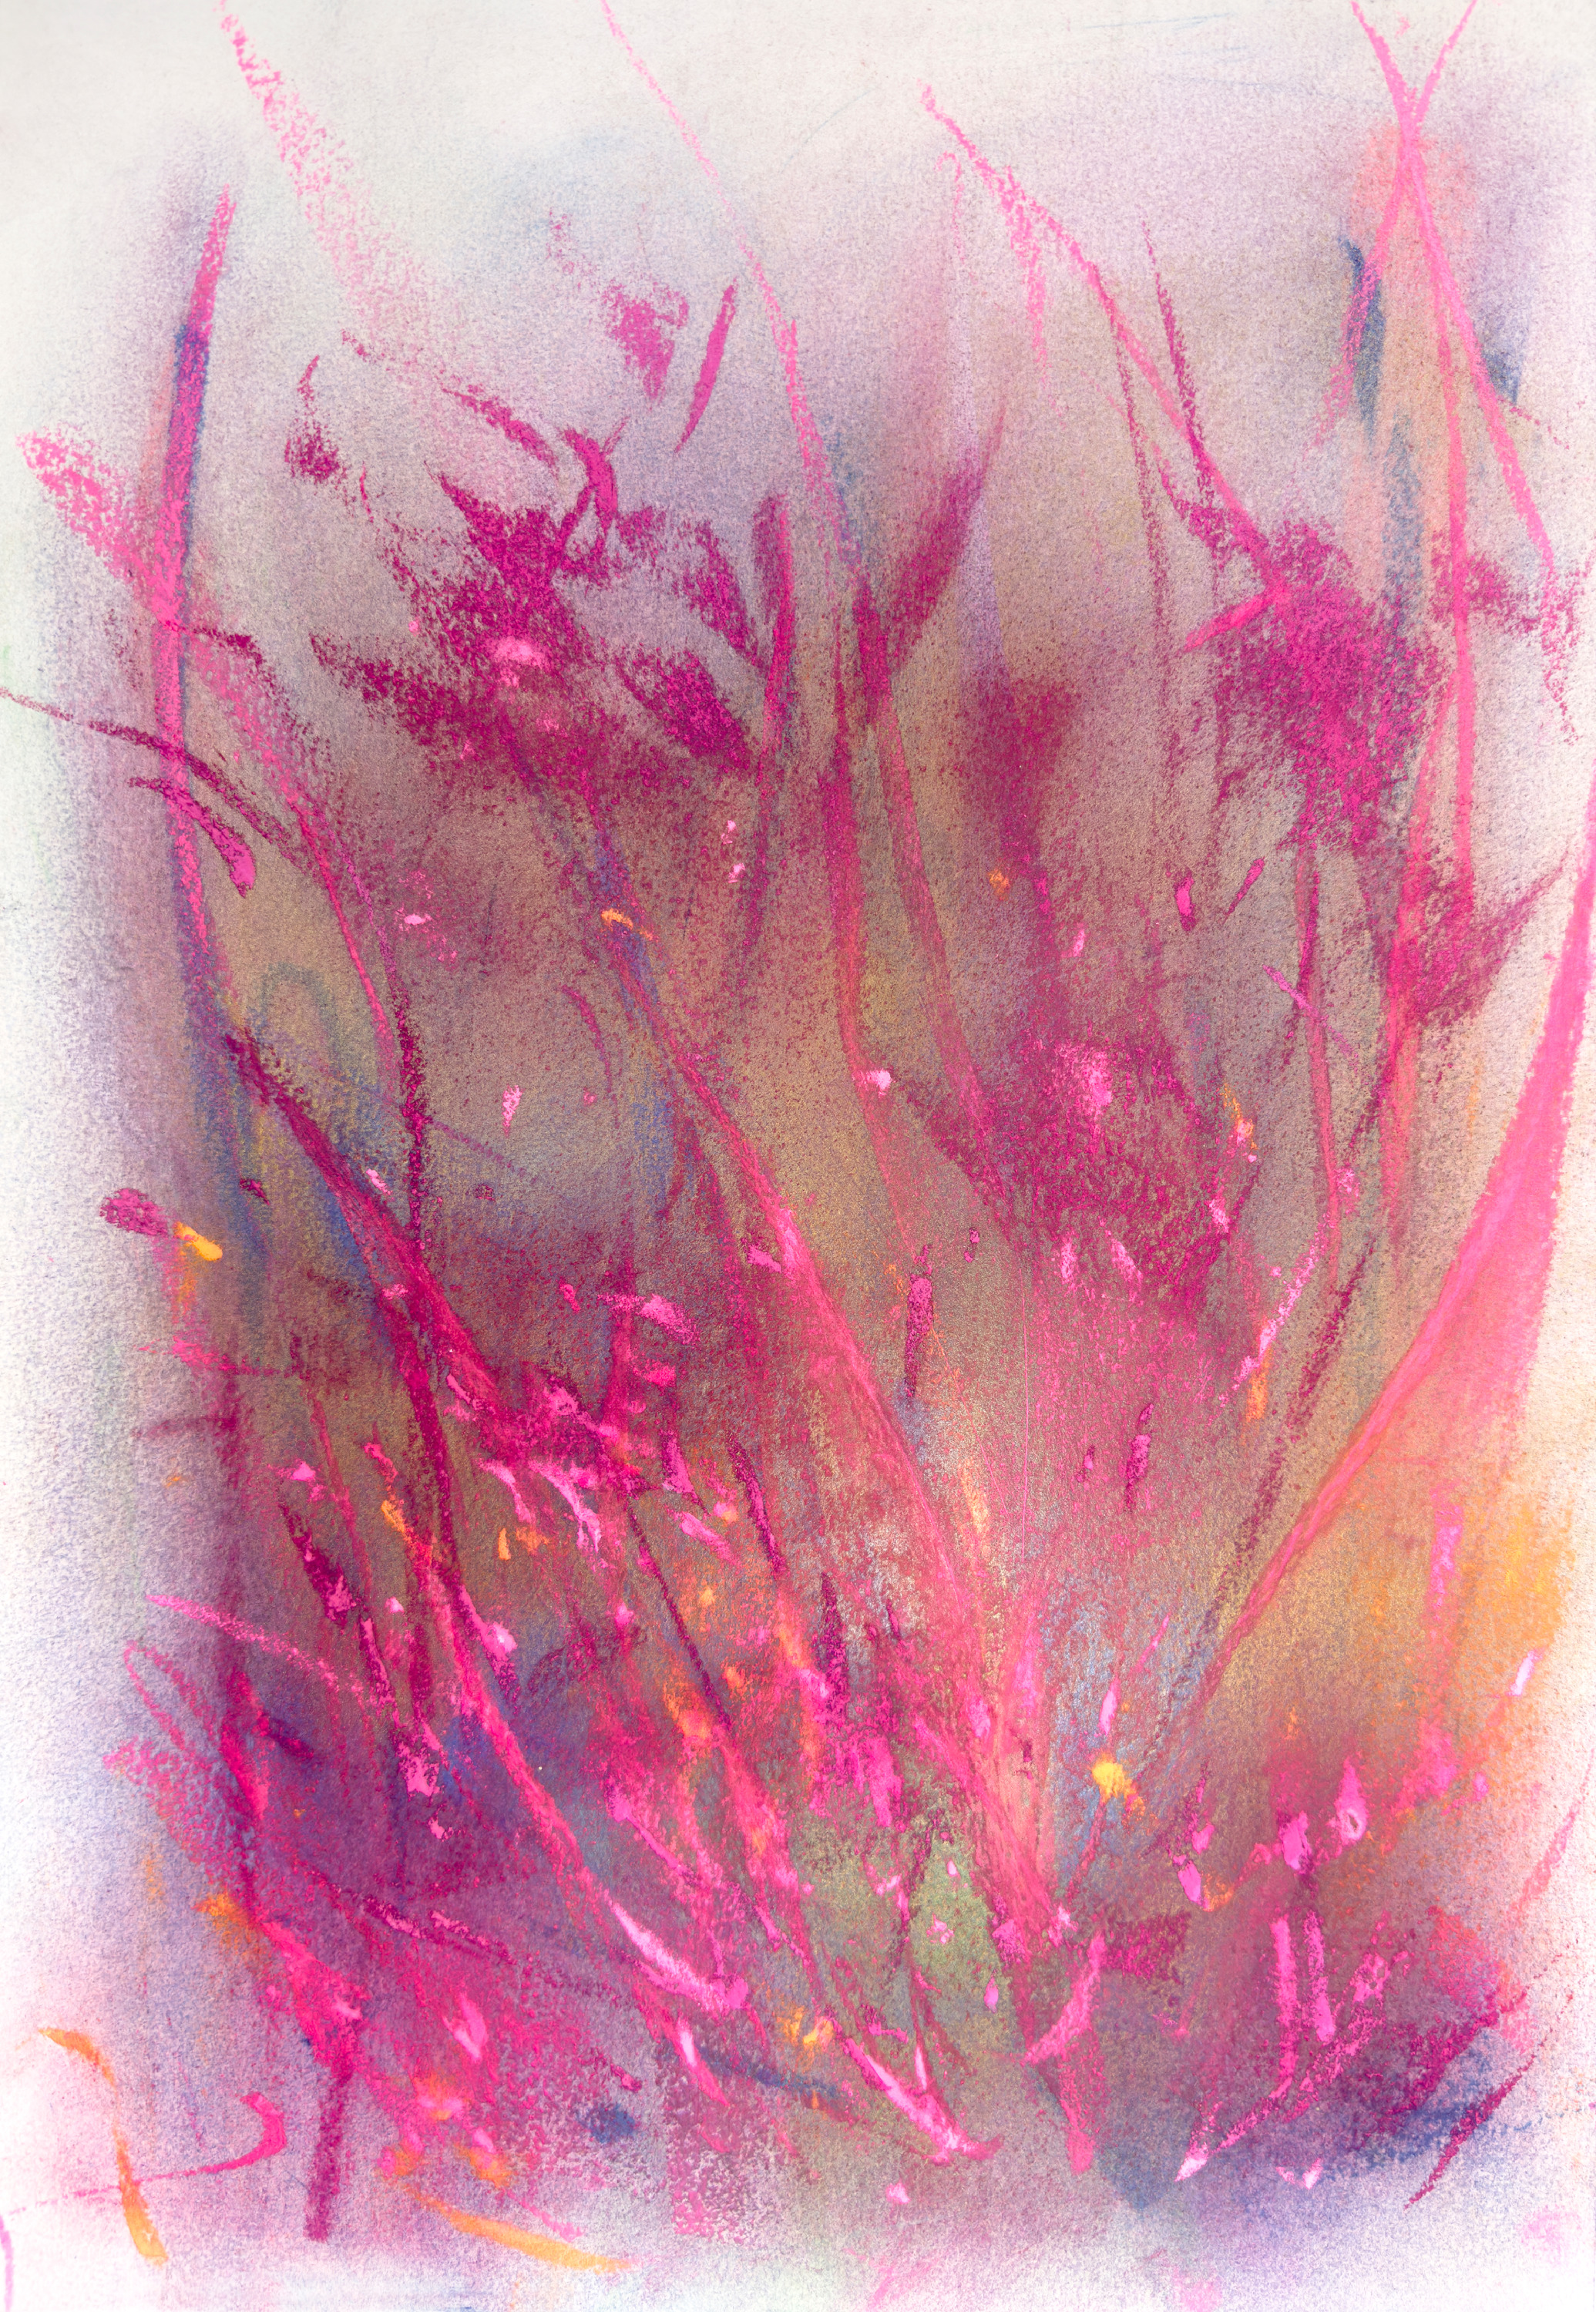 Wildflowers in a magenta dream oct2022 crop 20mb ongg1e